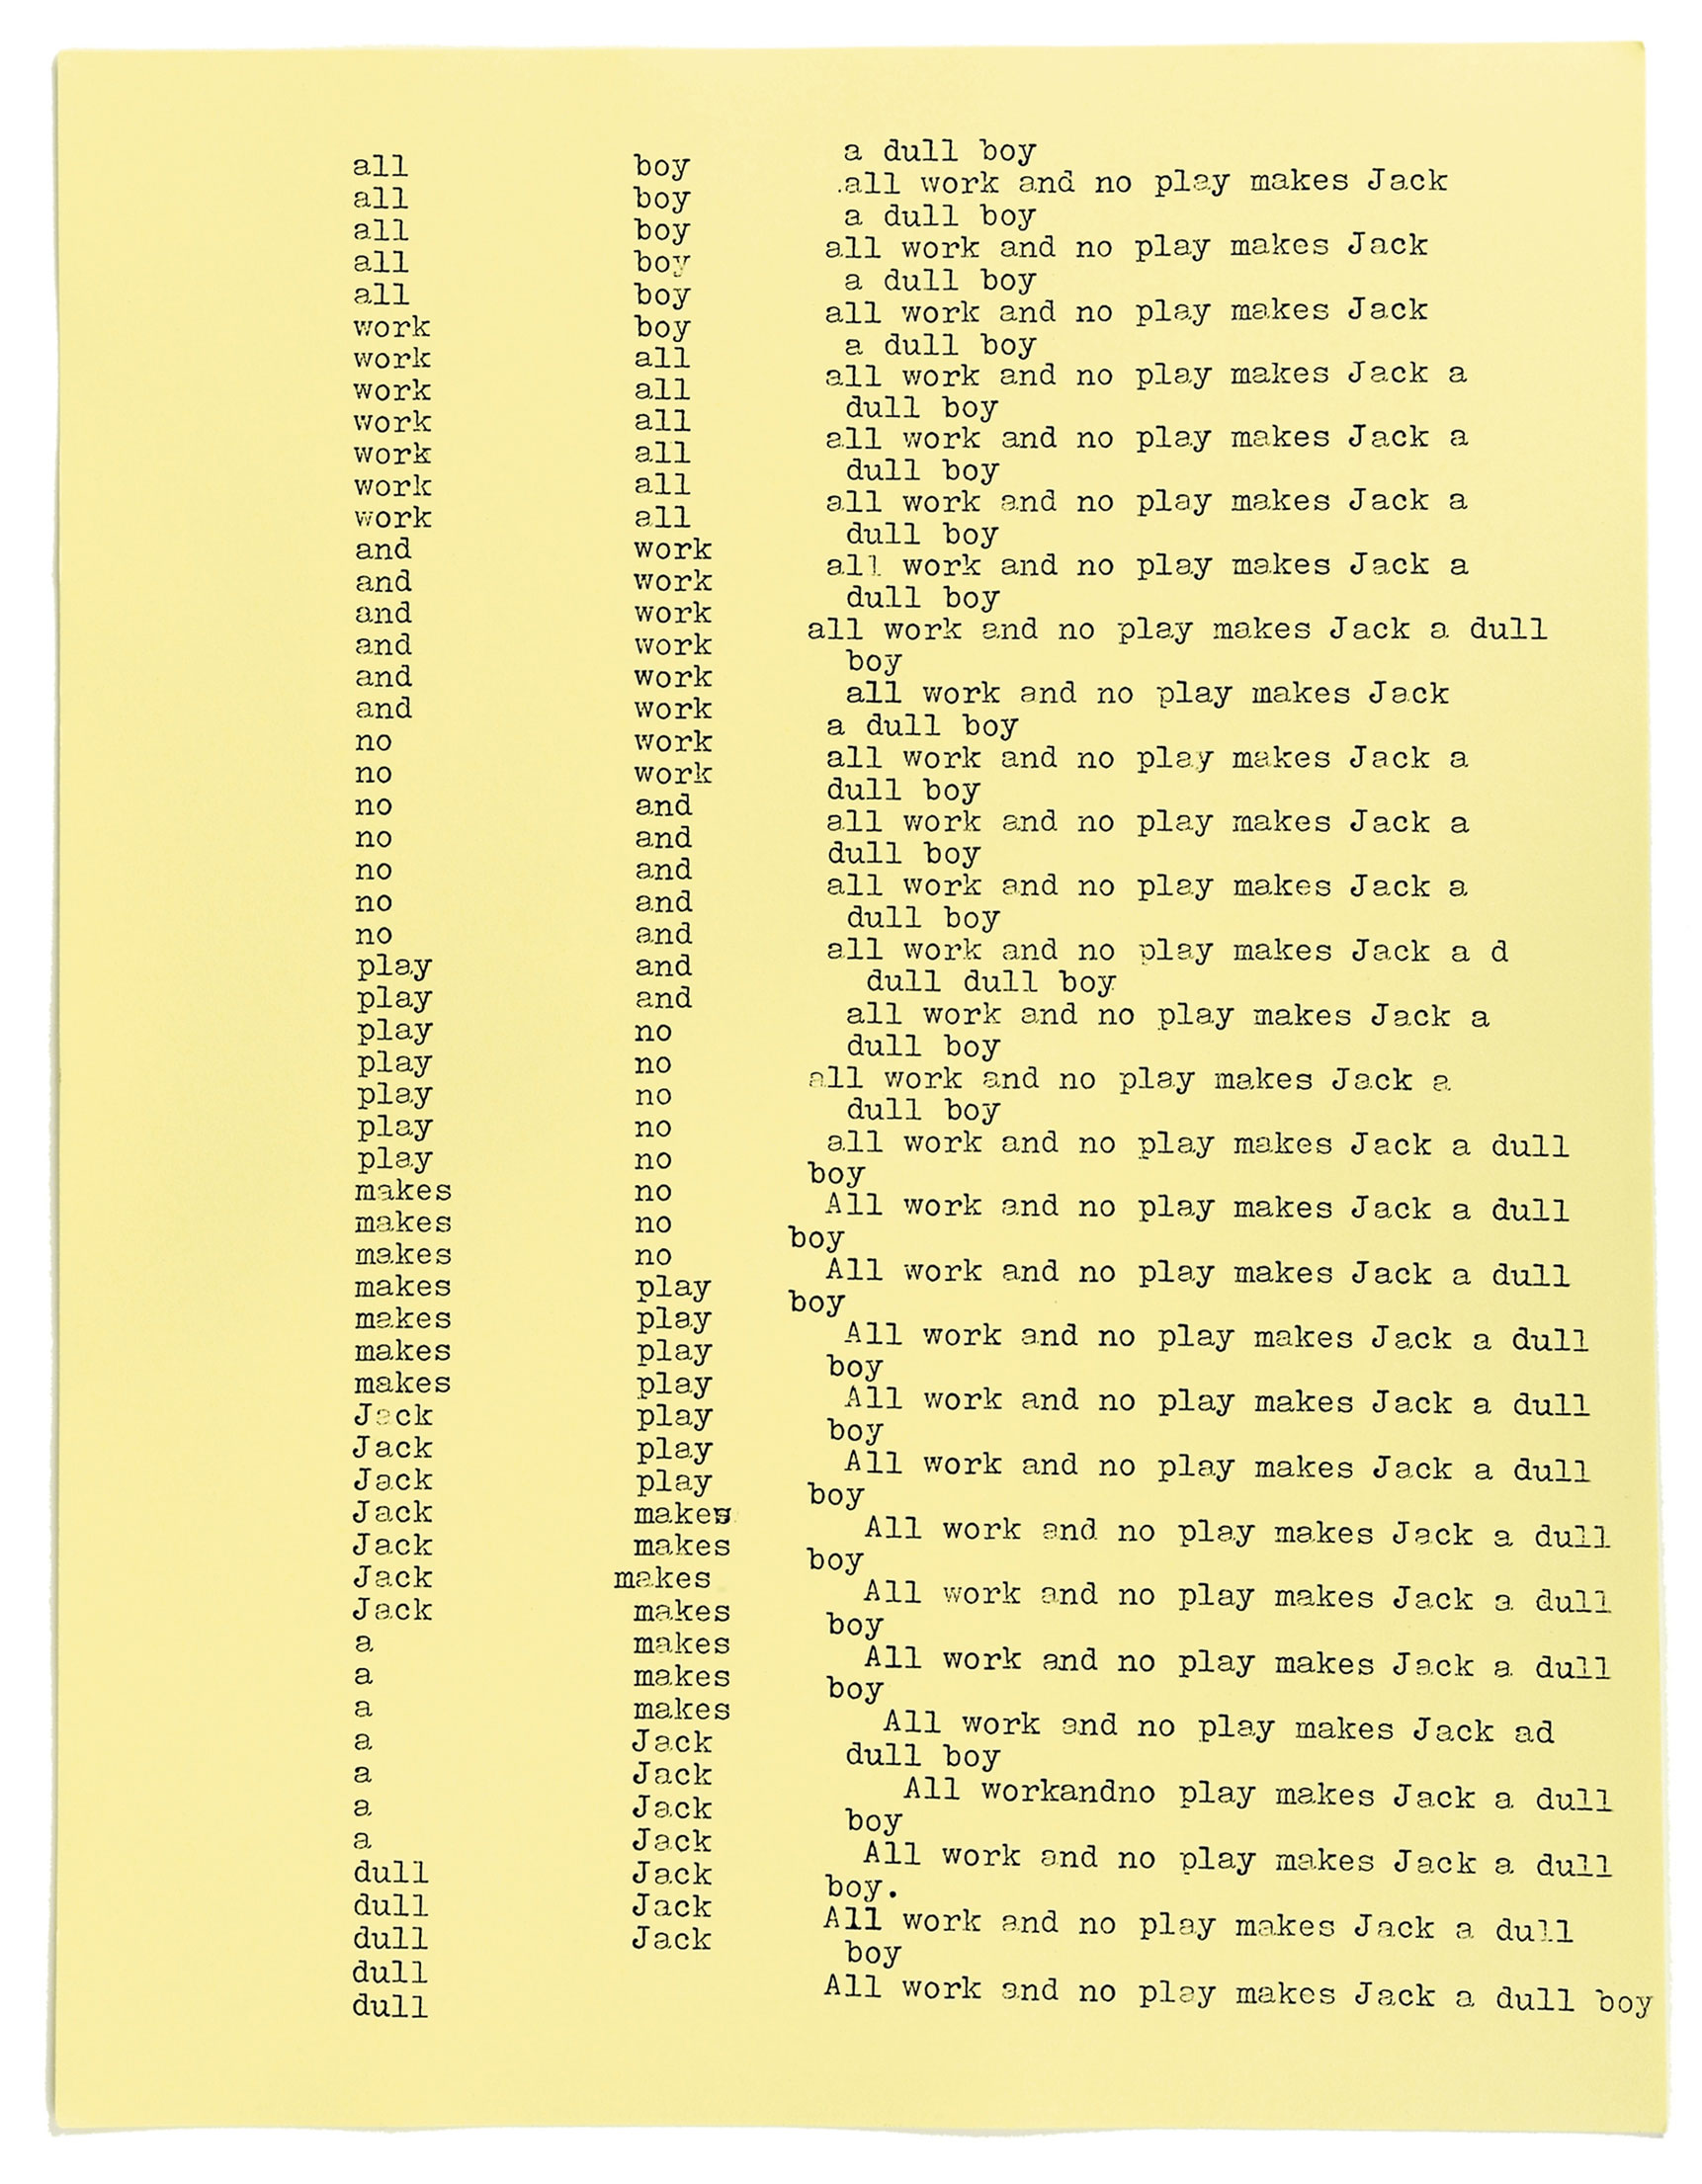 A scan of one of the manuscript pages used in Stanley Kubrick’s 1980 film The Shining. The page shows the quotation “All work and no play makes Jack a dull boy” typed over and over again. 